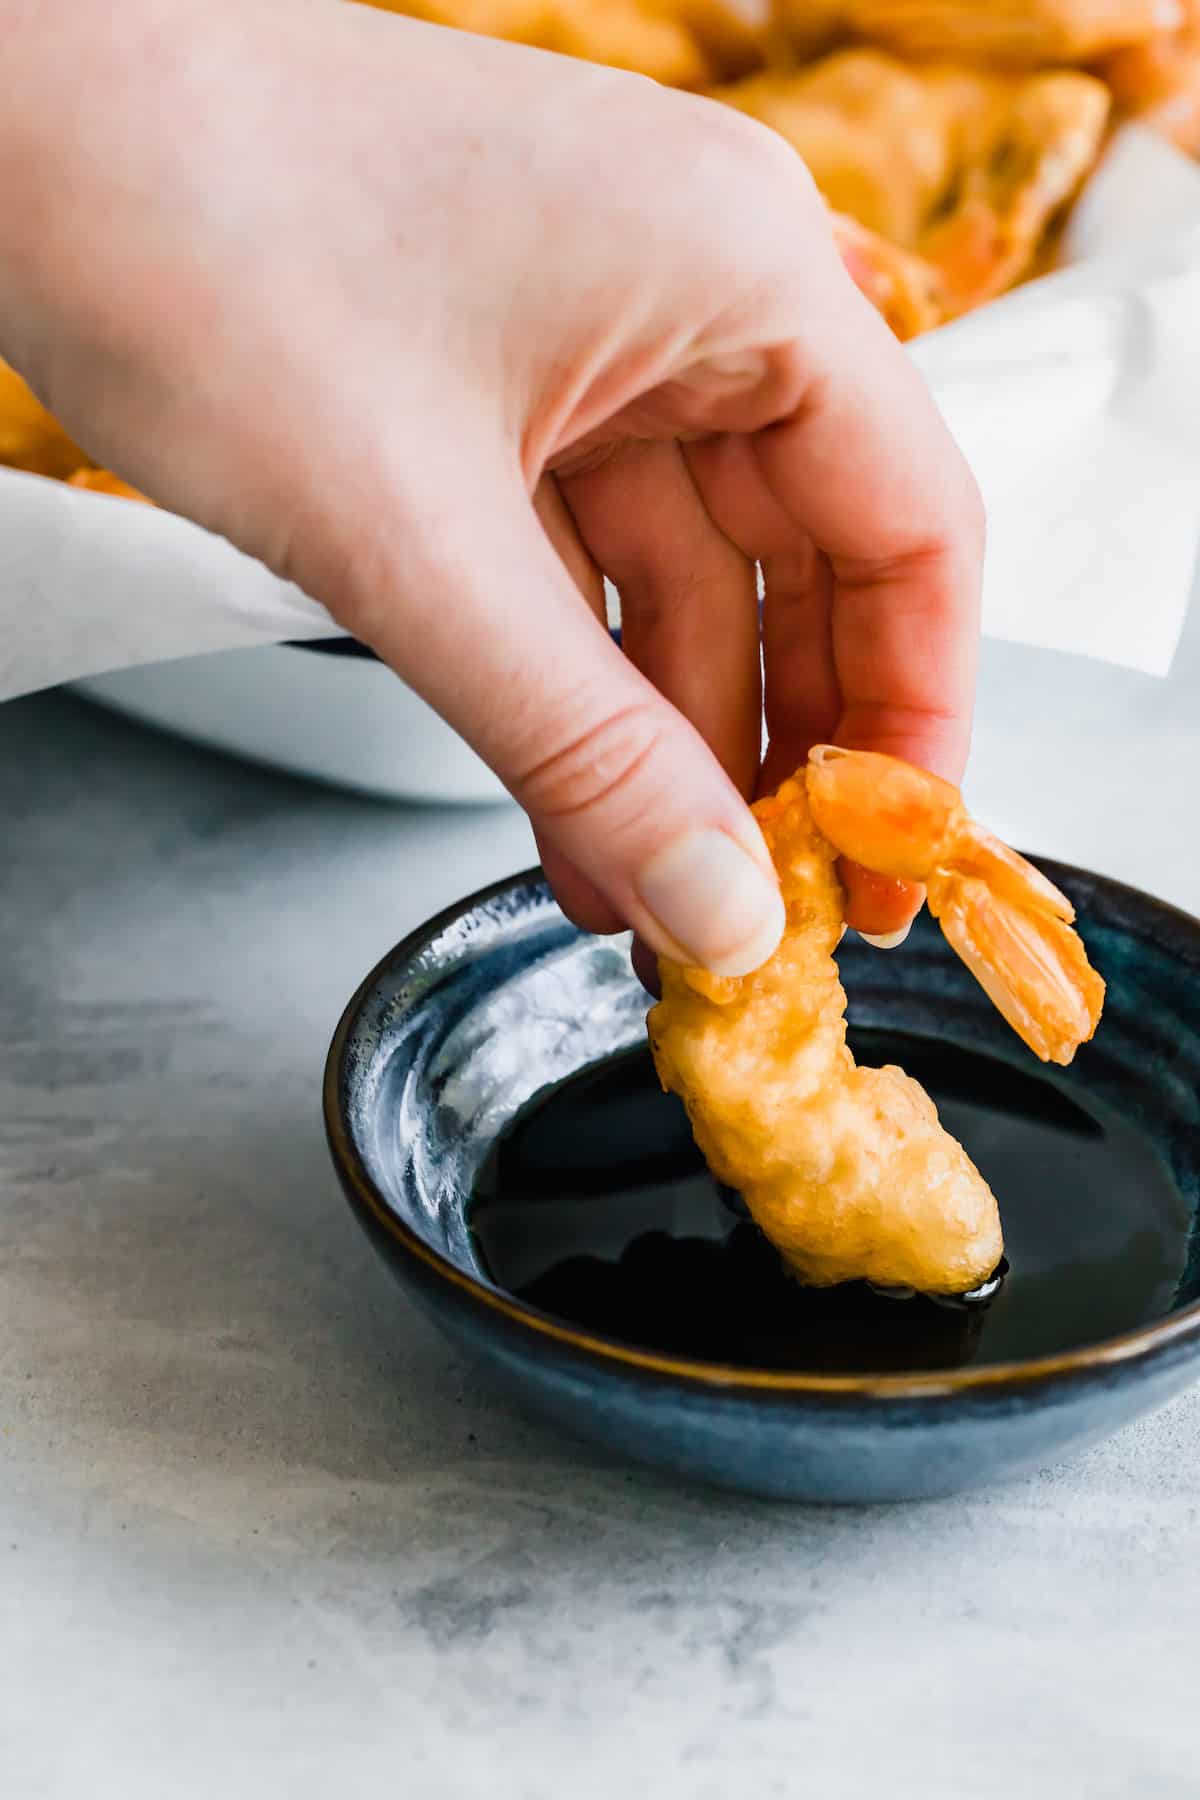 A Piece of Shrimp Tempura Being Dipped Into a Dish of Soy Sauce